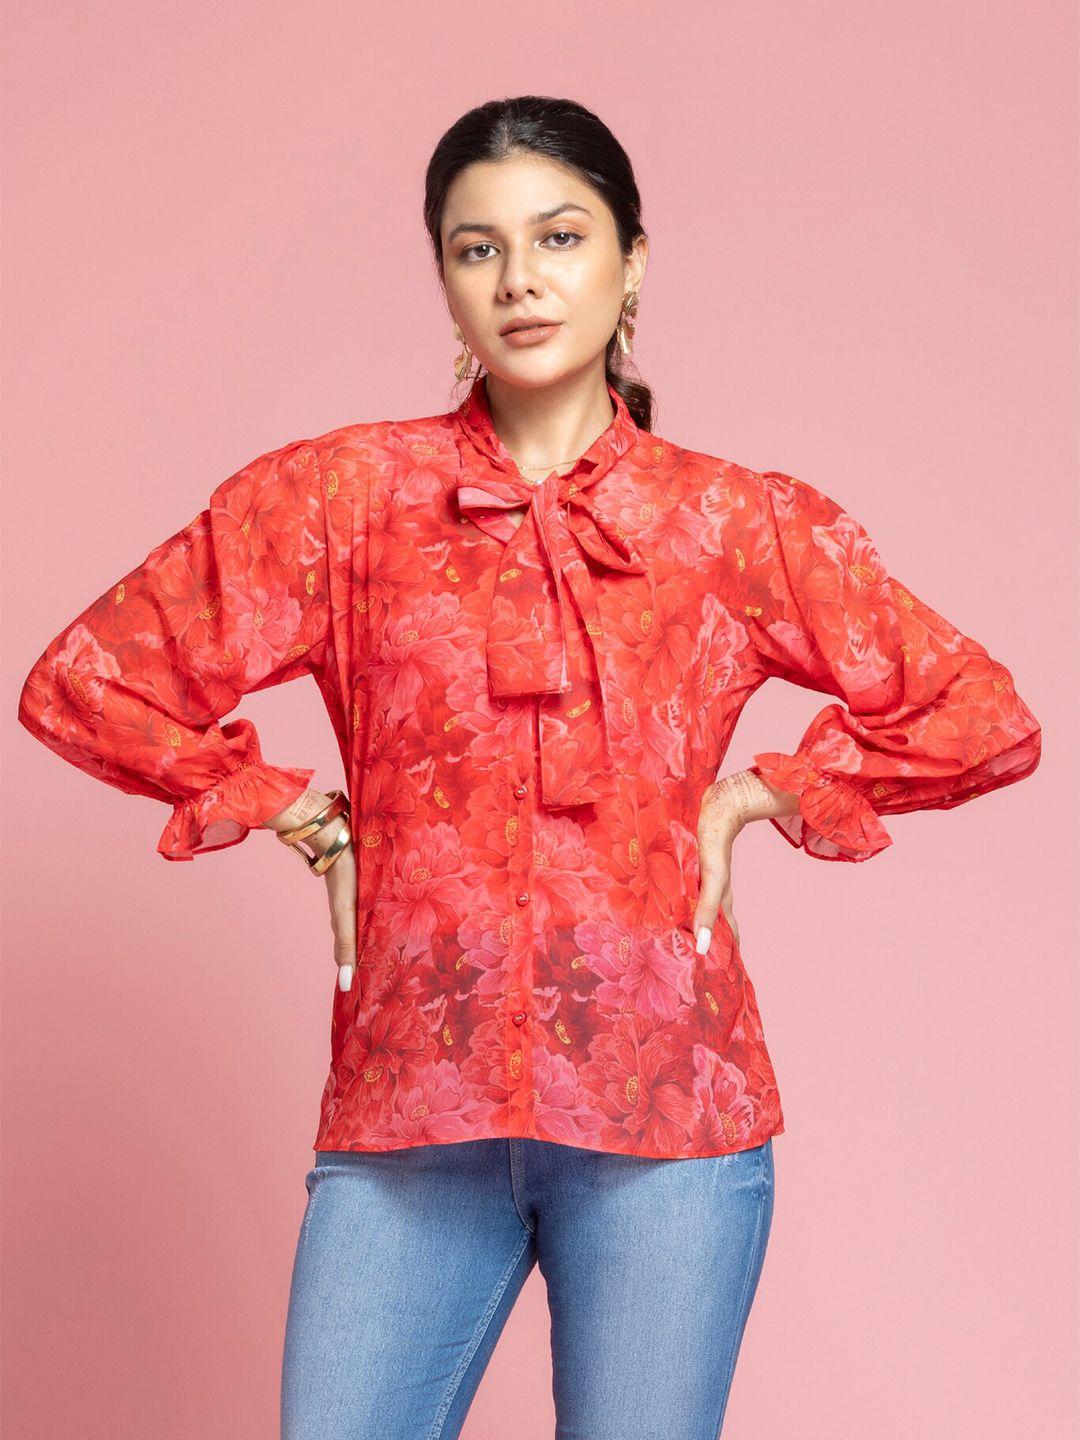 sew-you-soon-red-floral-print-tie-up-neck-puff-sleeve-georgette-shirt-style-top